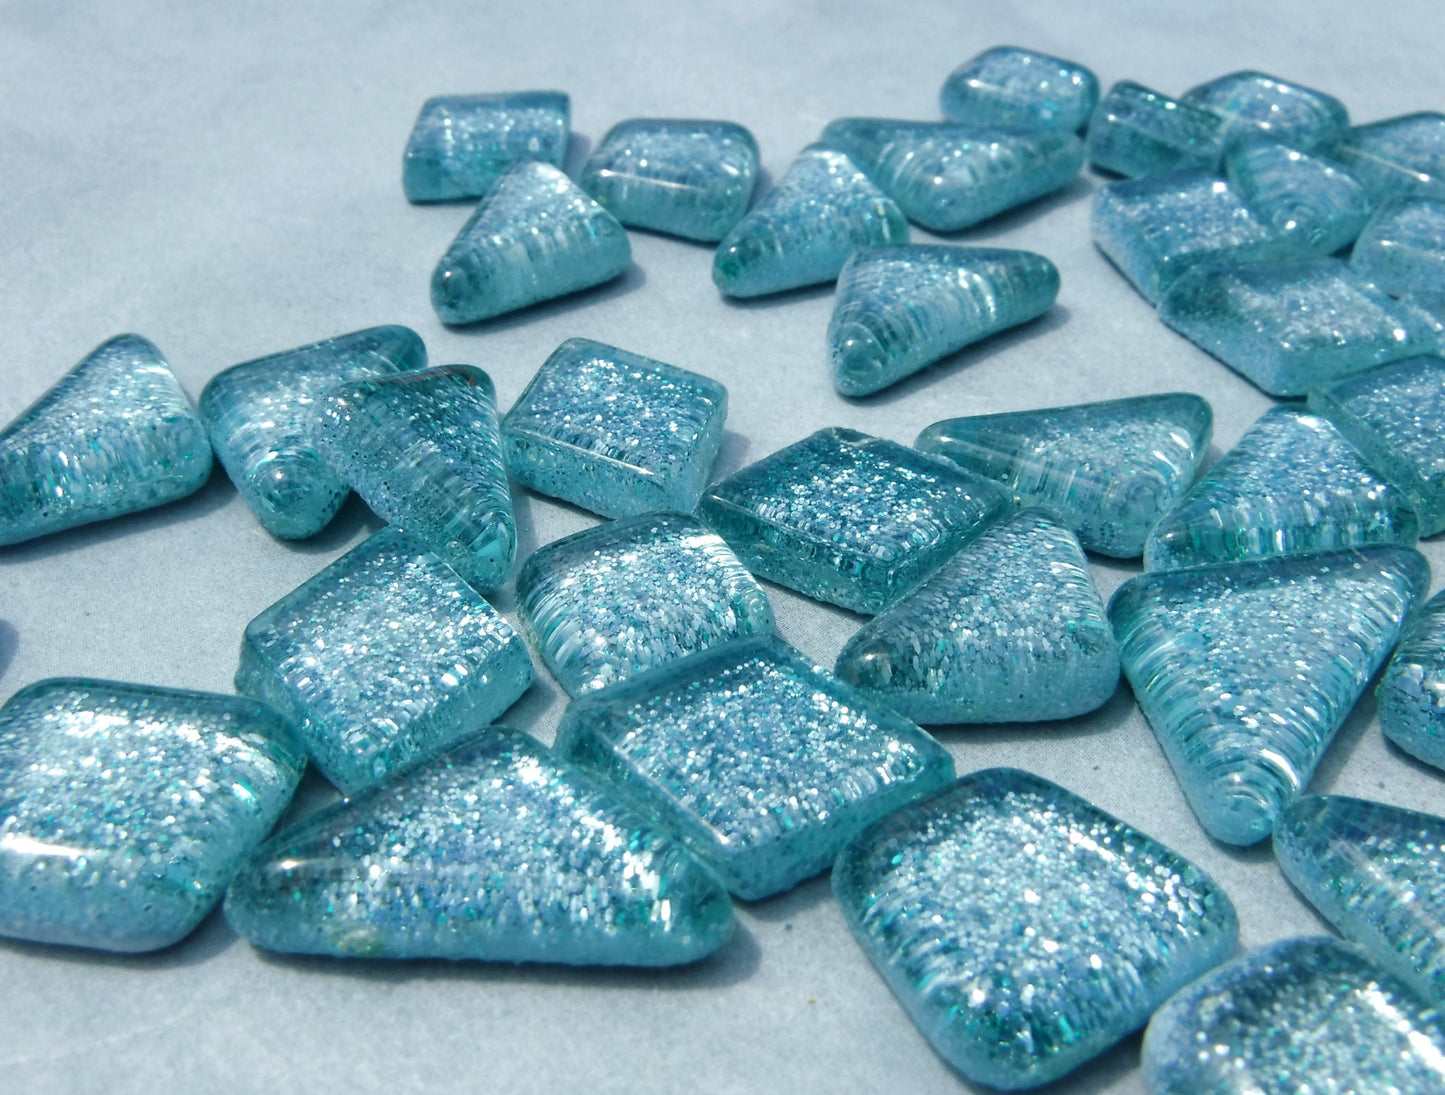 Raindrop Blue Glitter Puzzle Tiles - 100 grams in Assorted Shapes Glass Mosaic Tiles